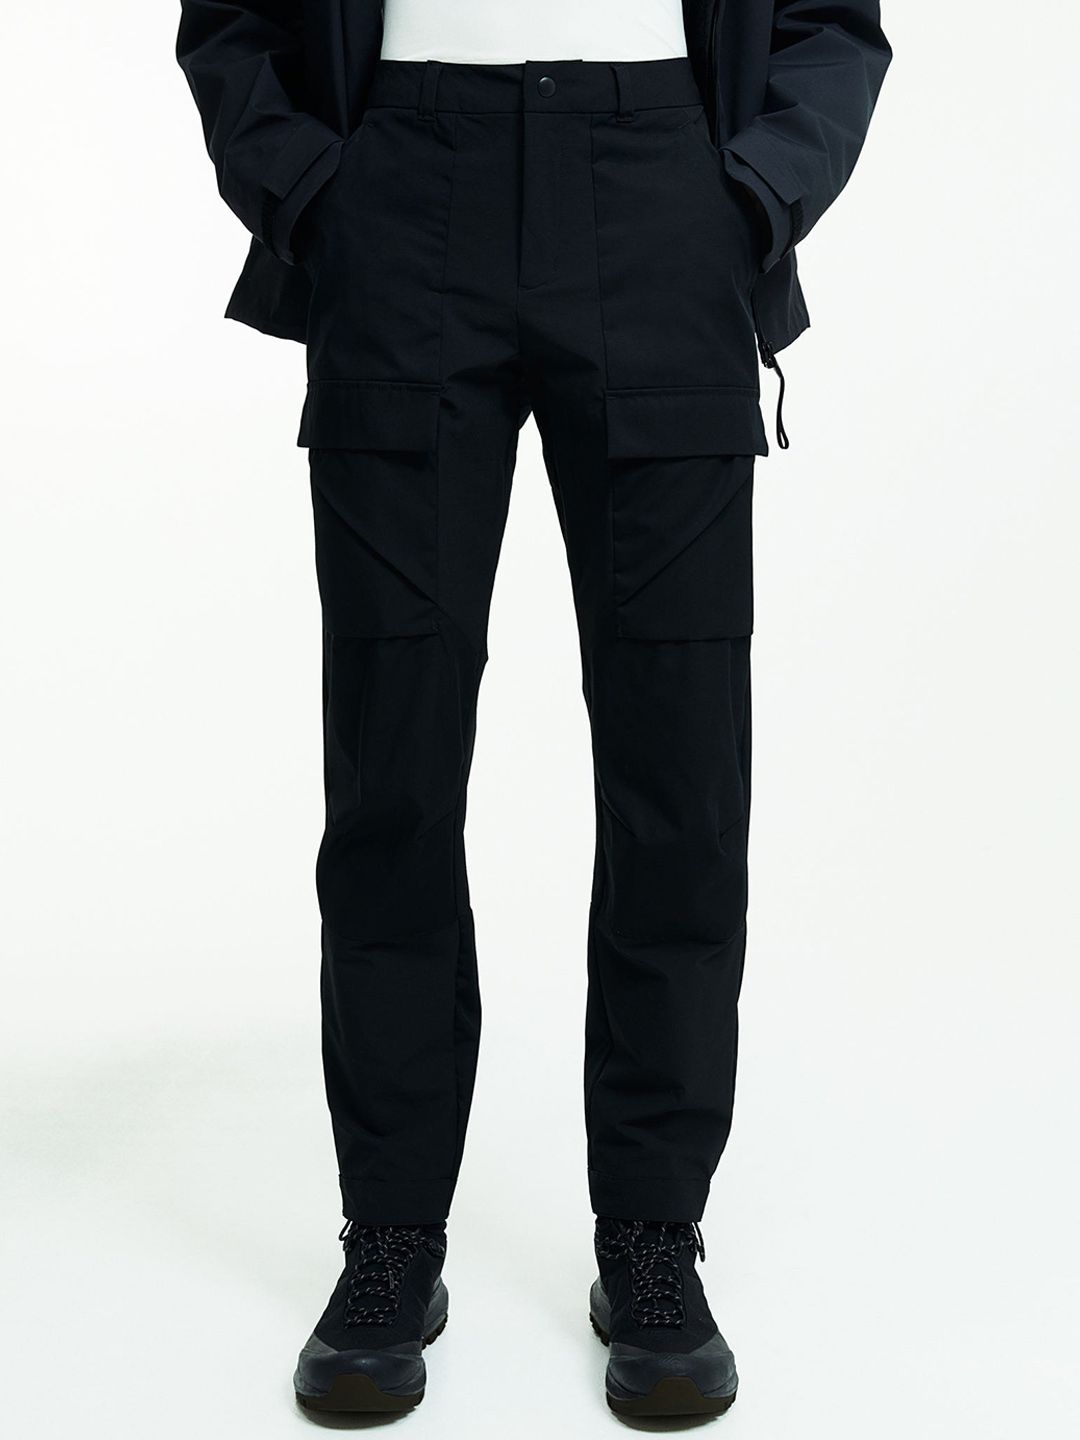 H&M Women Water-Repellent Outdoor Trousers Price in India